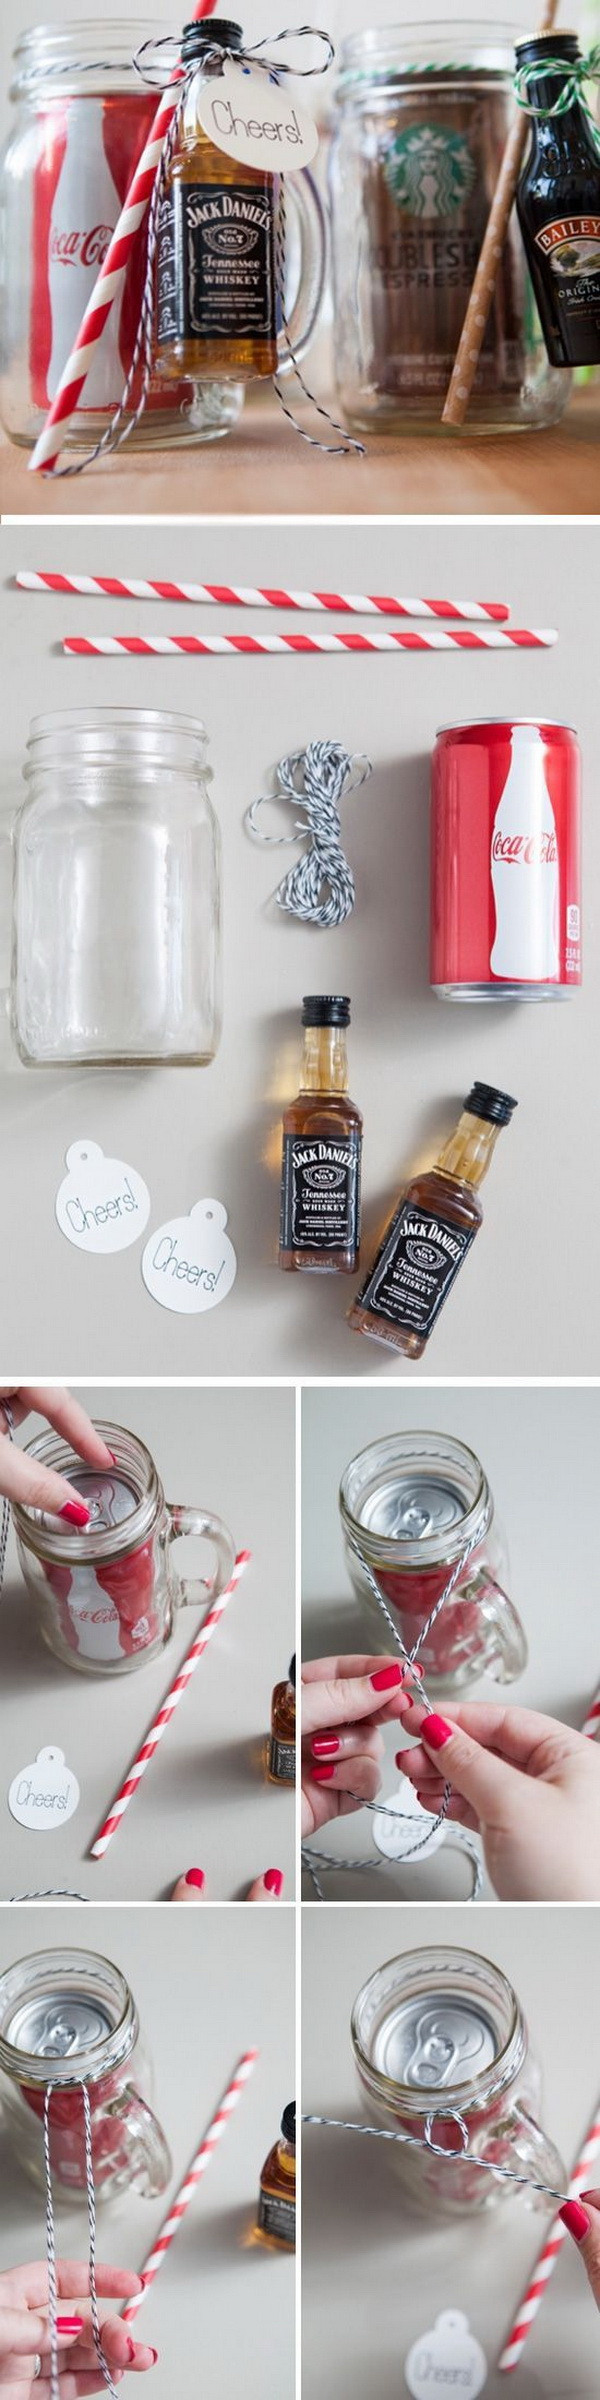 Valentine Gift Ideas To Make For Him
 25 Great DIY Gift Ideas for Dad This Holiday For